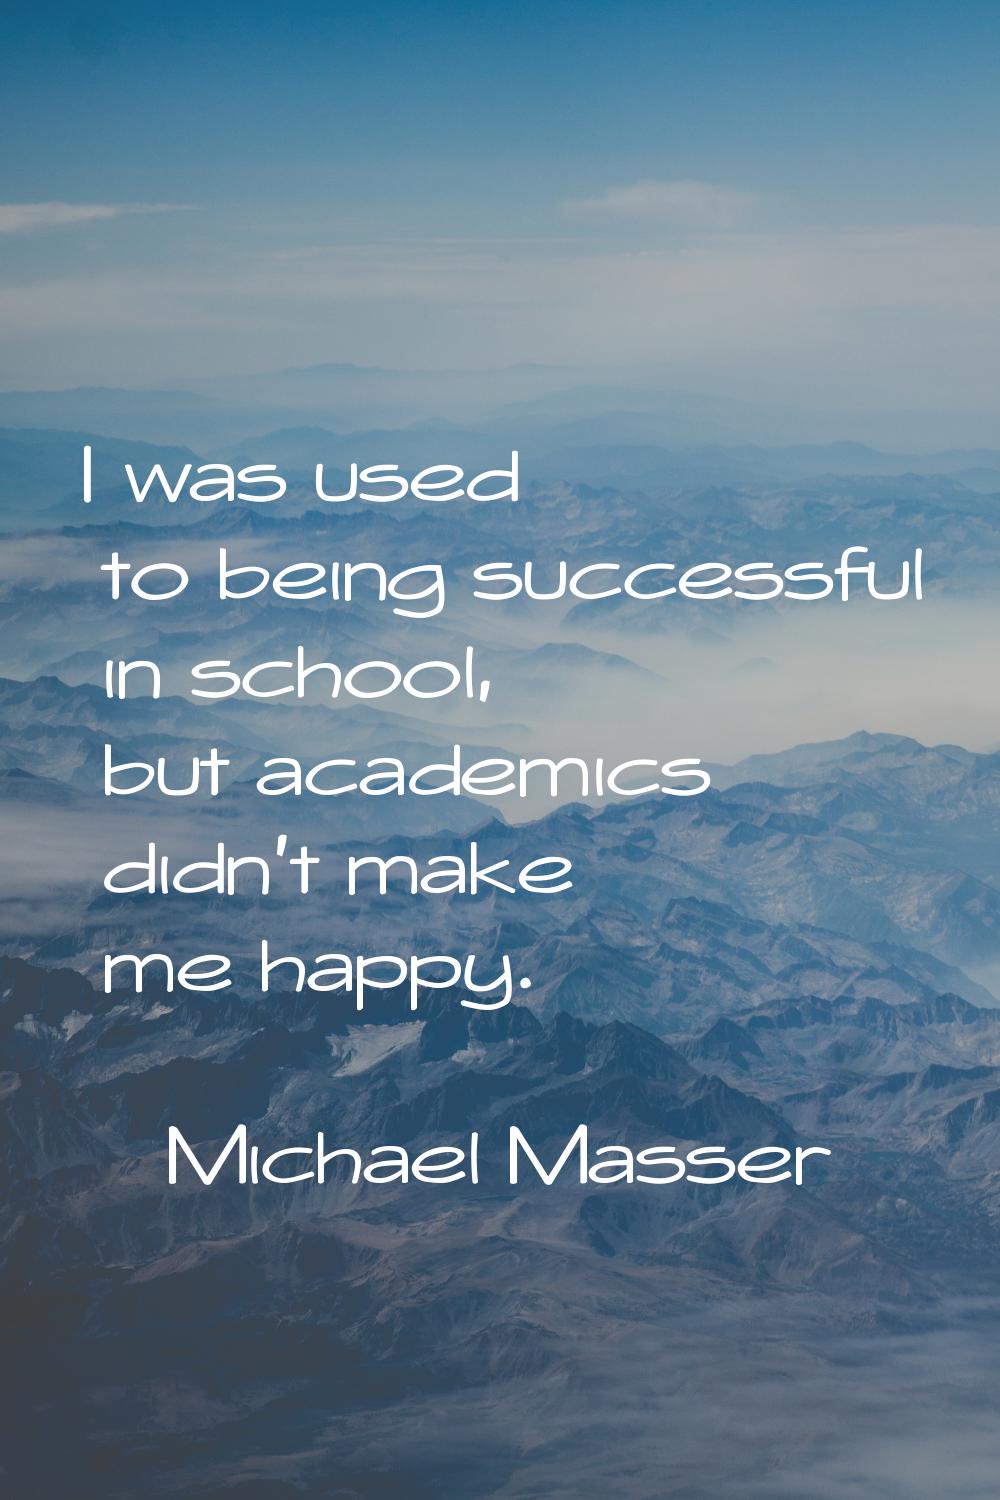 I was used to being successful in school, but academics didn't make me happy.